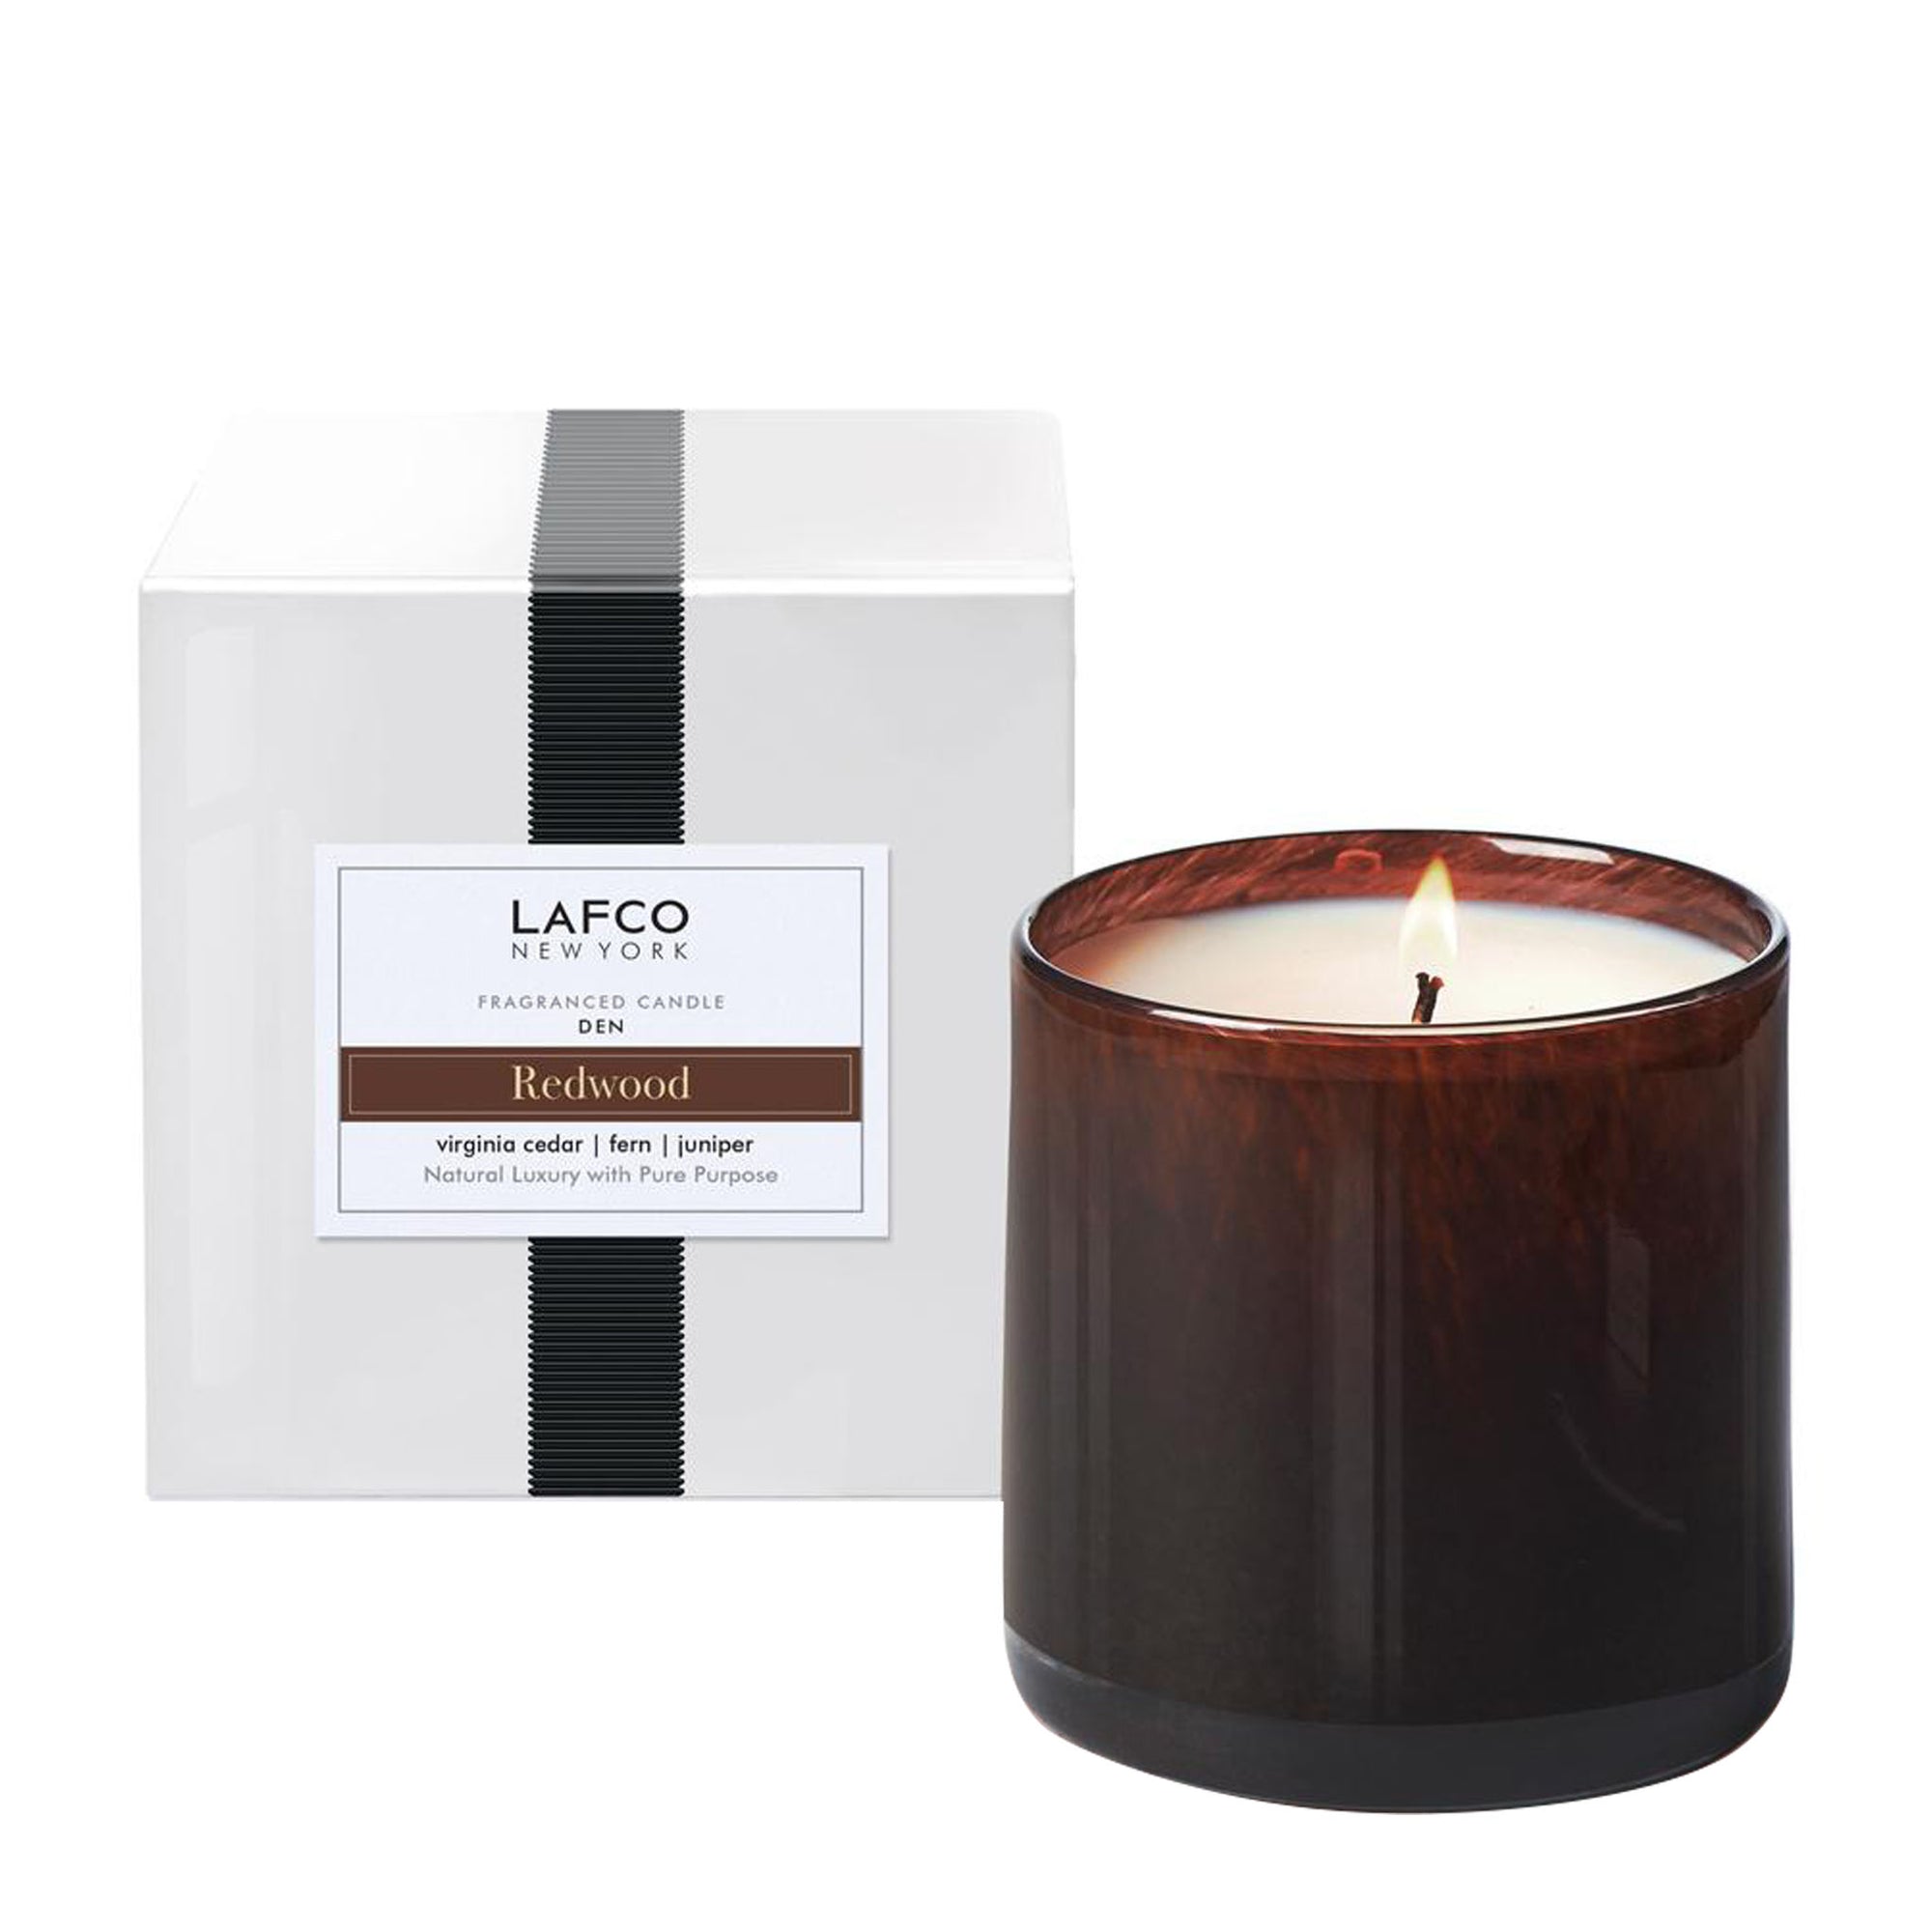 Lafco Den | Redwood Candle